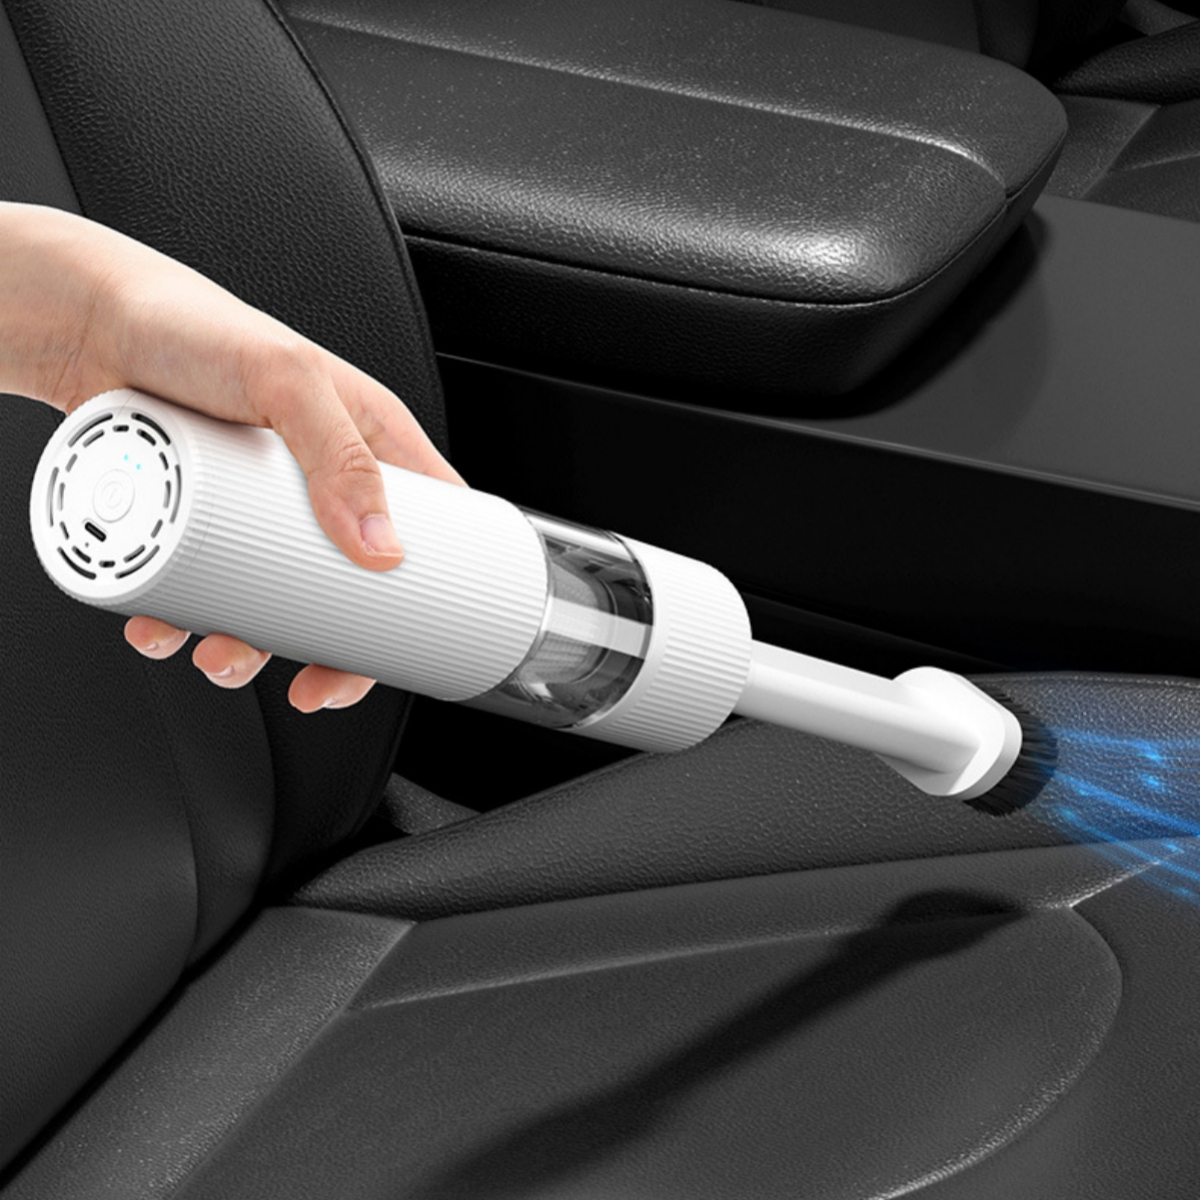 Powerful Portable Staubsauger Handstaubsauger, Handheld Home Cordless Cleaner Rechargeable by Vacuum SHAOKE USB Powered